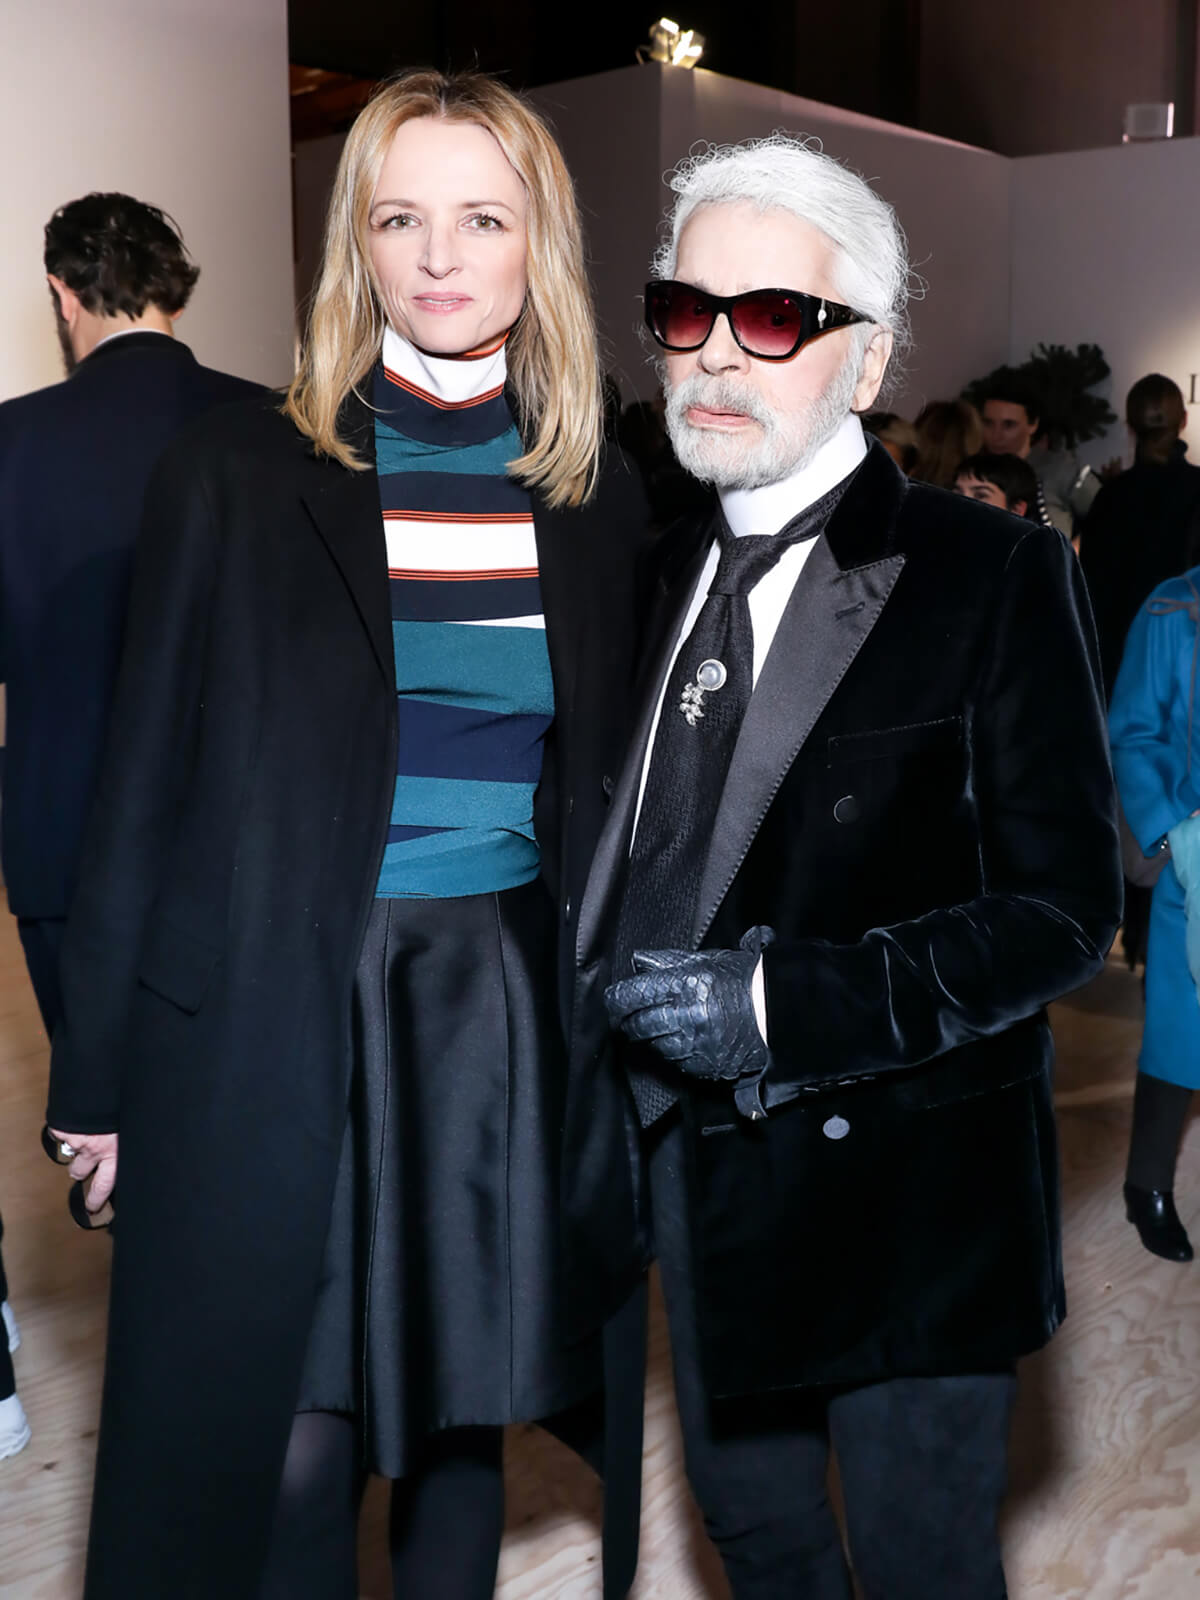 Designer Karl Lagerfeld pictured with LVMH's Delphine Arnault at a drinks party